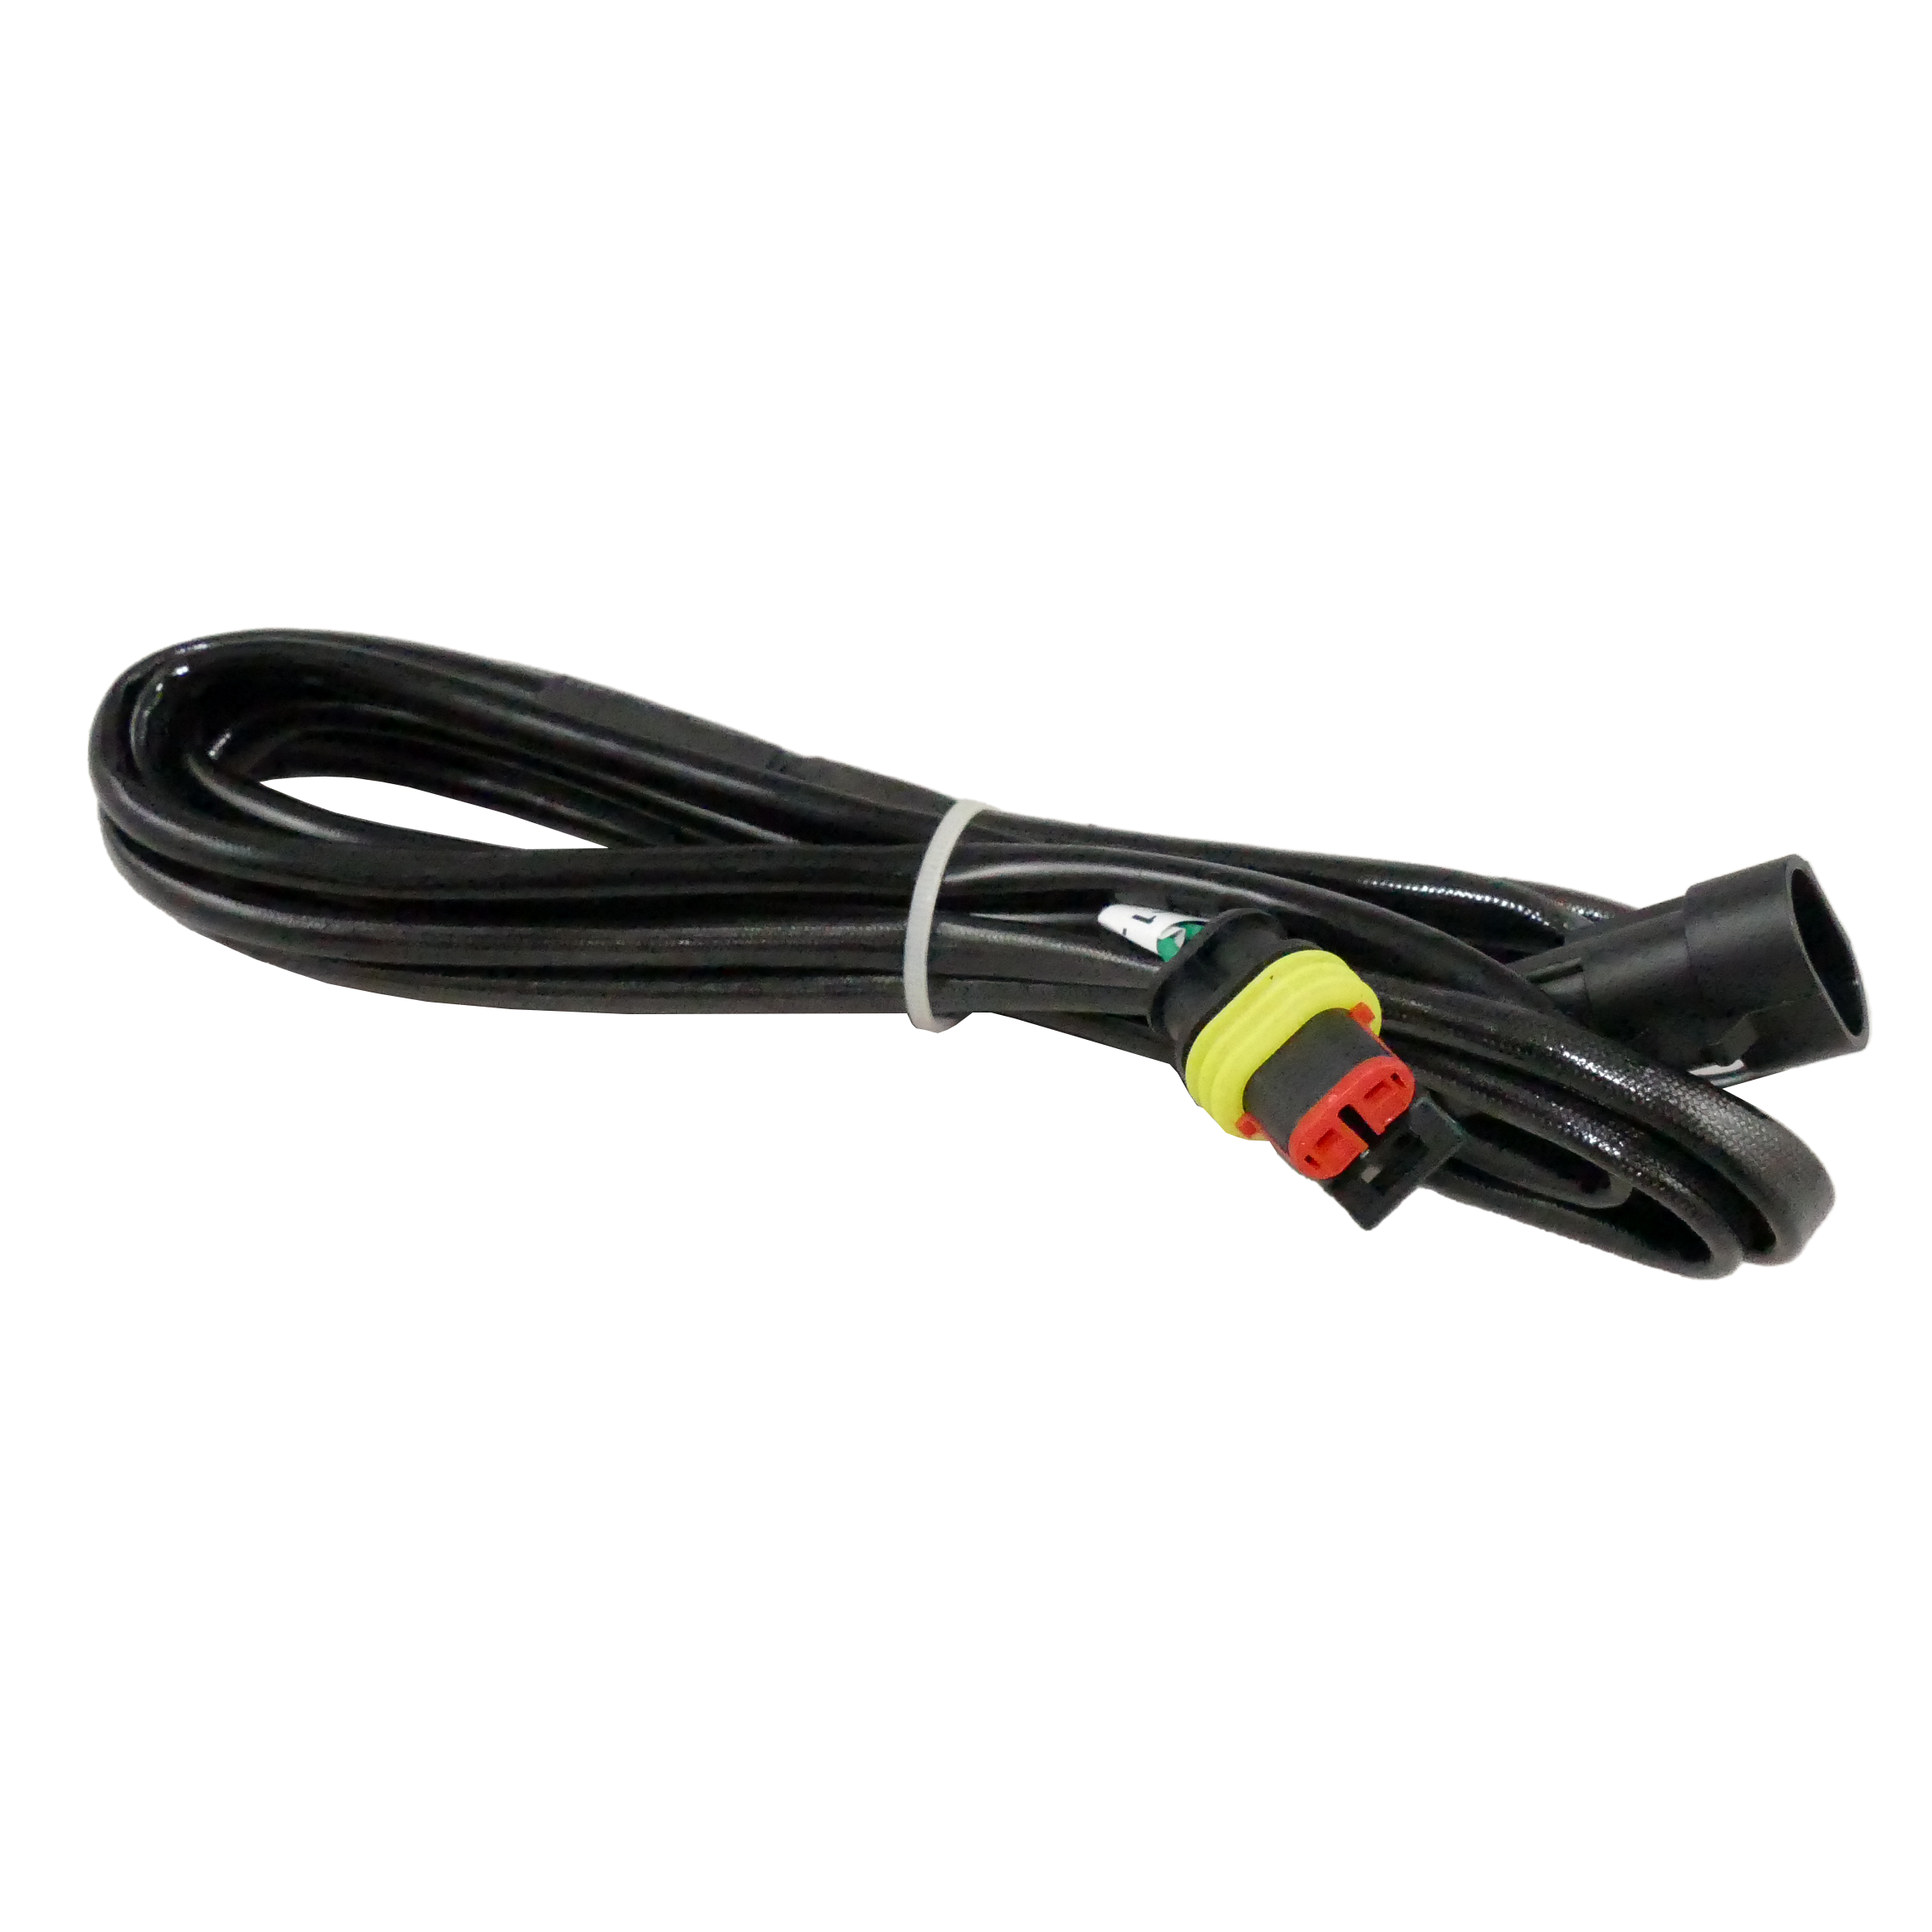 025-000708-000 of Calaer by Reformtech Heating Remote Temperature Sensor Harness